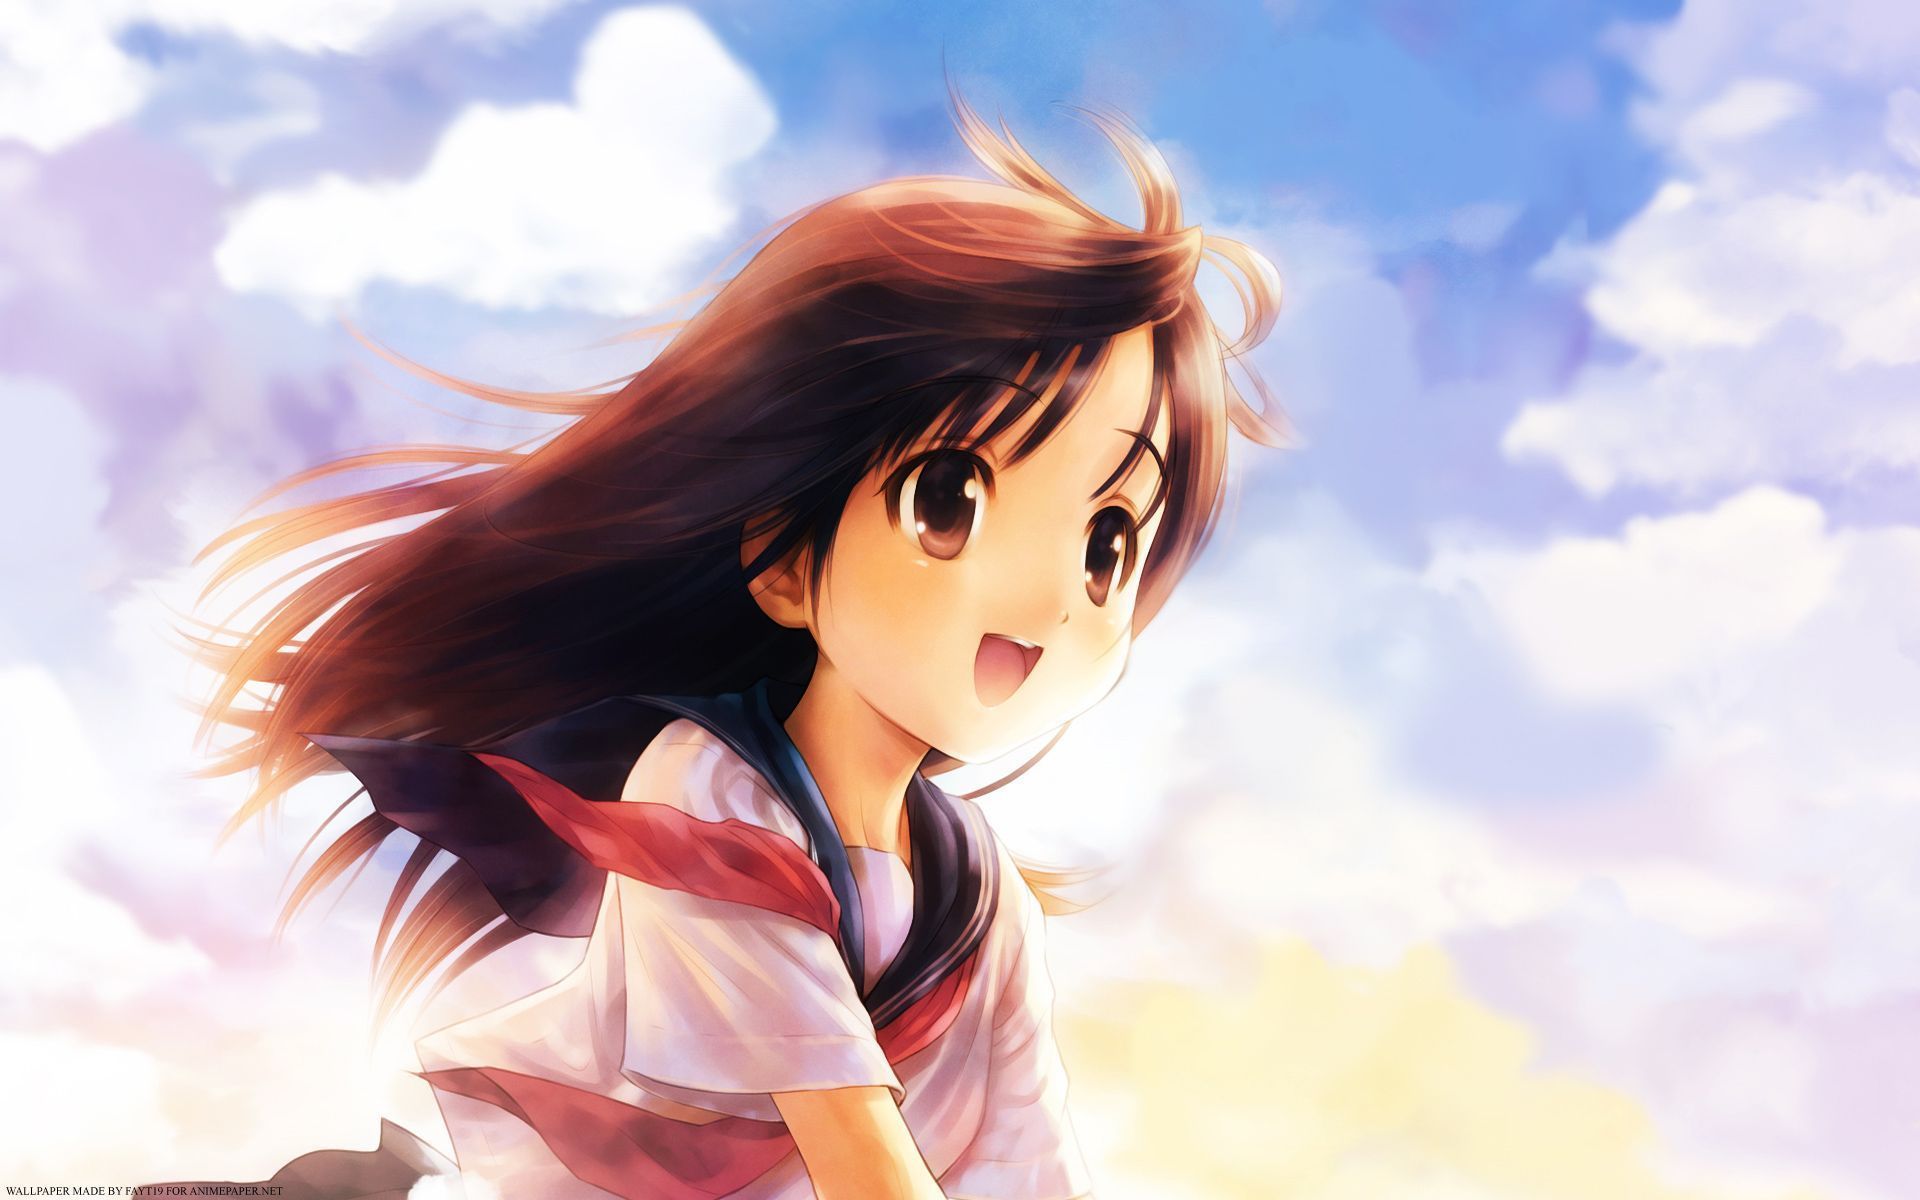 Anime Girl Background Images 563 - HD Wallpapers Site